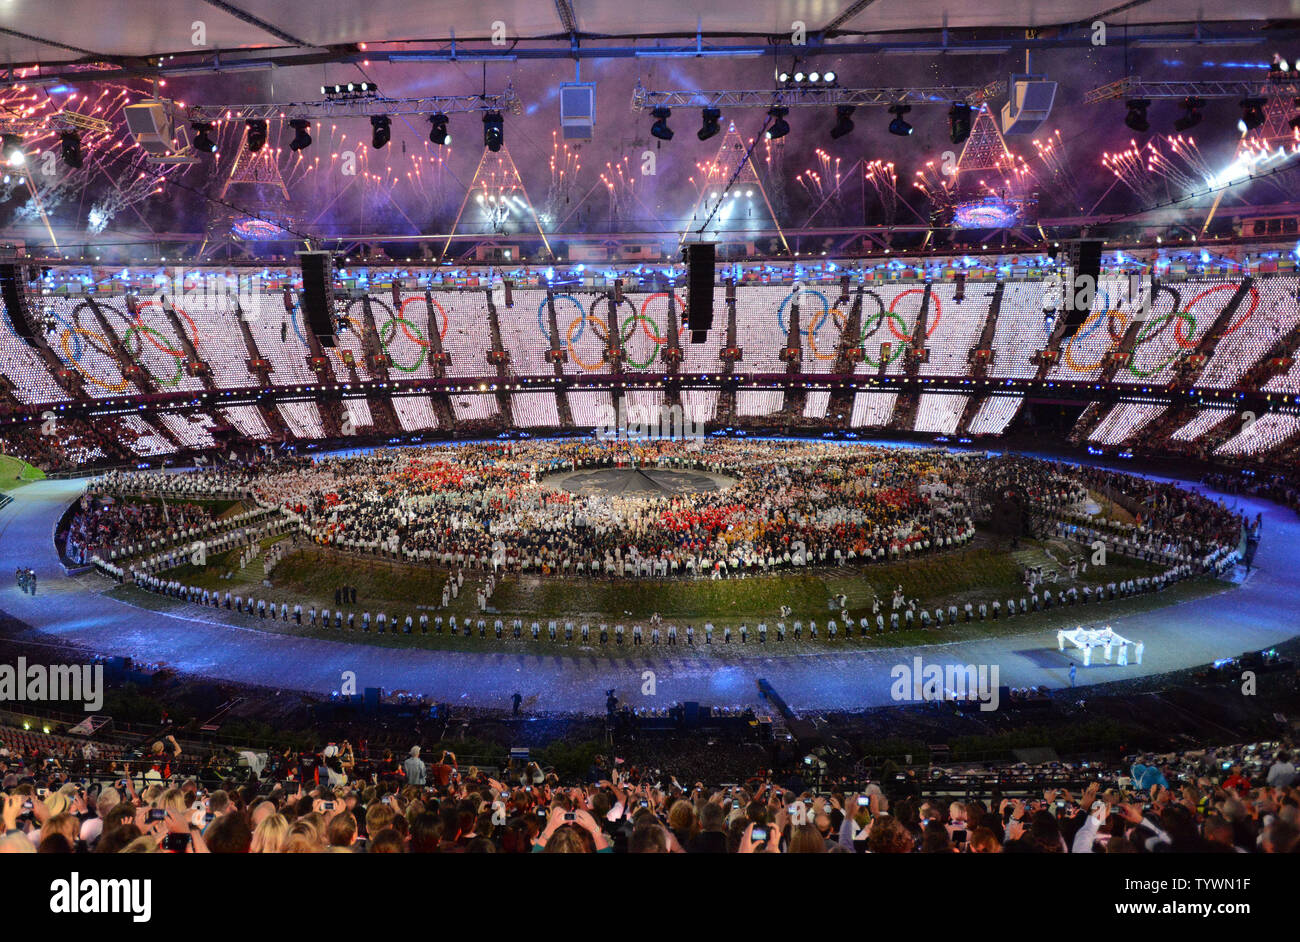 The Olympic rings are displayed during the Opening Ceremony of the London 2012 Summer Olympics on July 27, 2012 in Stratford, London.  UPI/Pat Benic Stock Photo